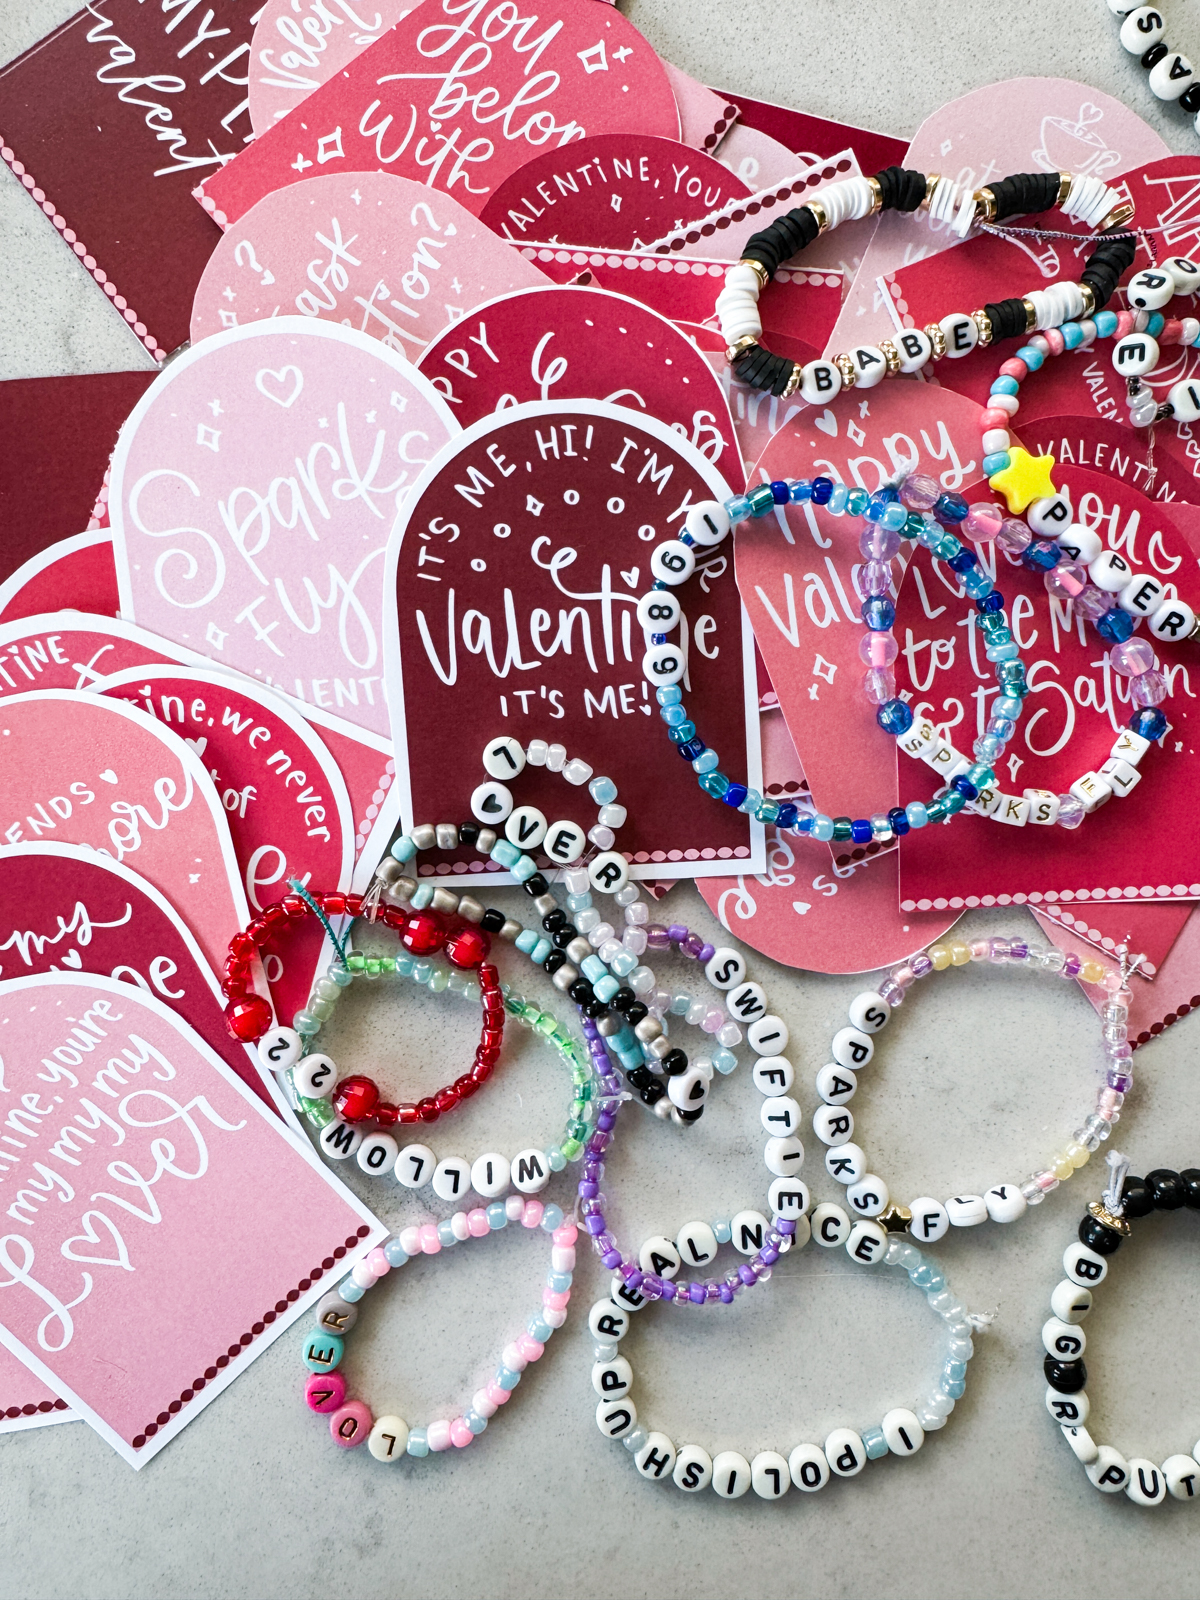 taylor swift themed valentines day cards printed and cut to size (pink and deep burgundy color with white hand lettered song lyrics) shown on marble countertop with beaded friendship bracelets